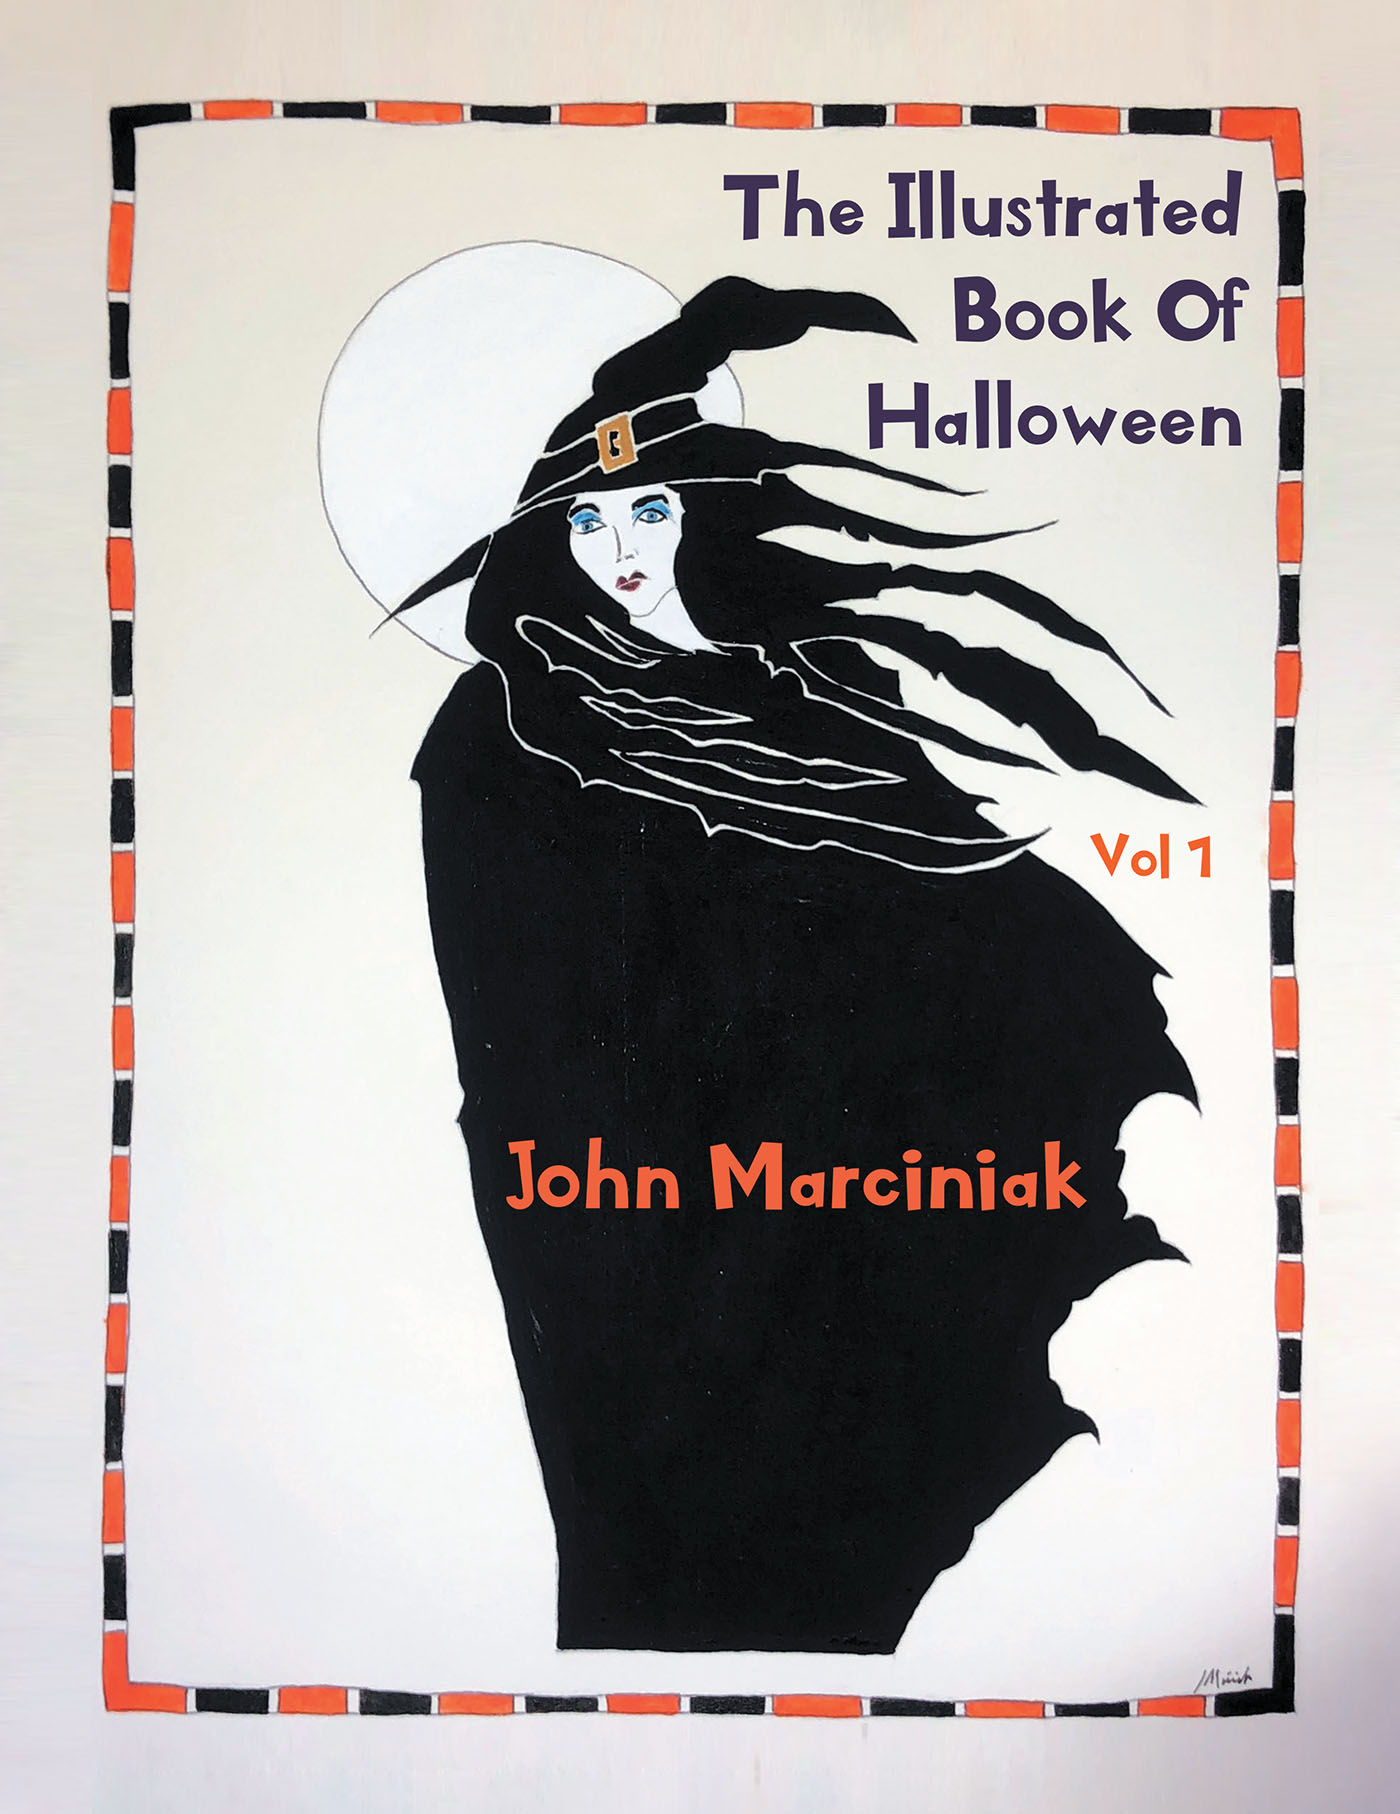 Author John Marciniak’s New Book, "The Illustrated Book of Halloween Vol 1," is a Compilation of Spellbinding and Alluring Halloween Illustrations